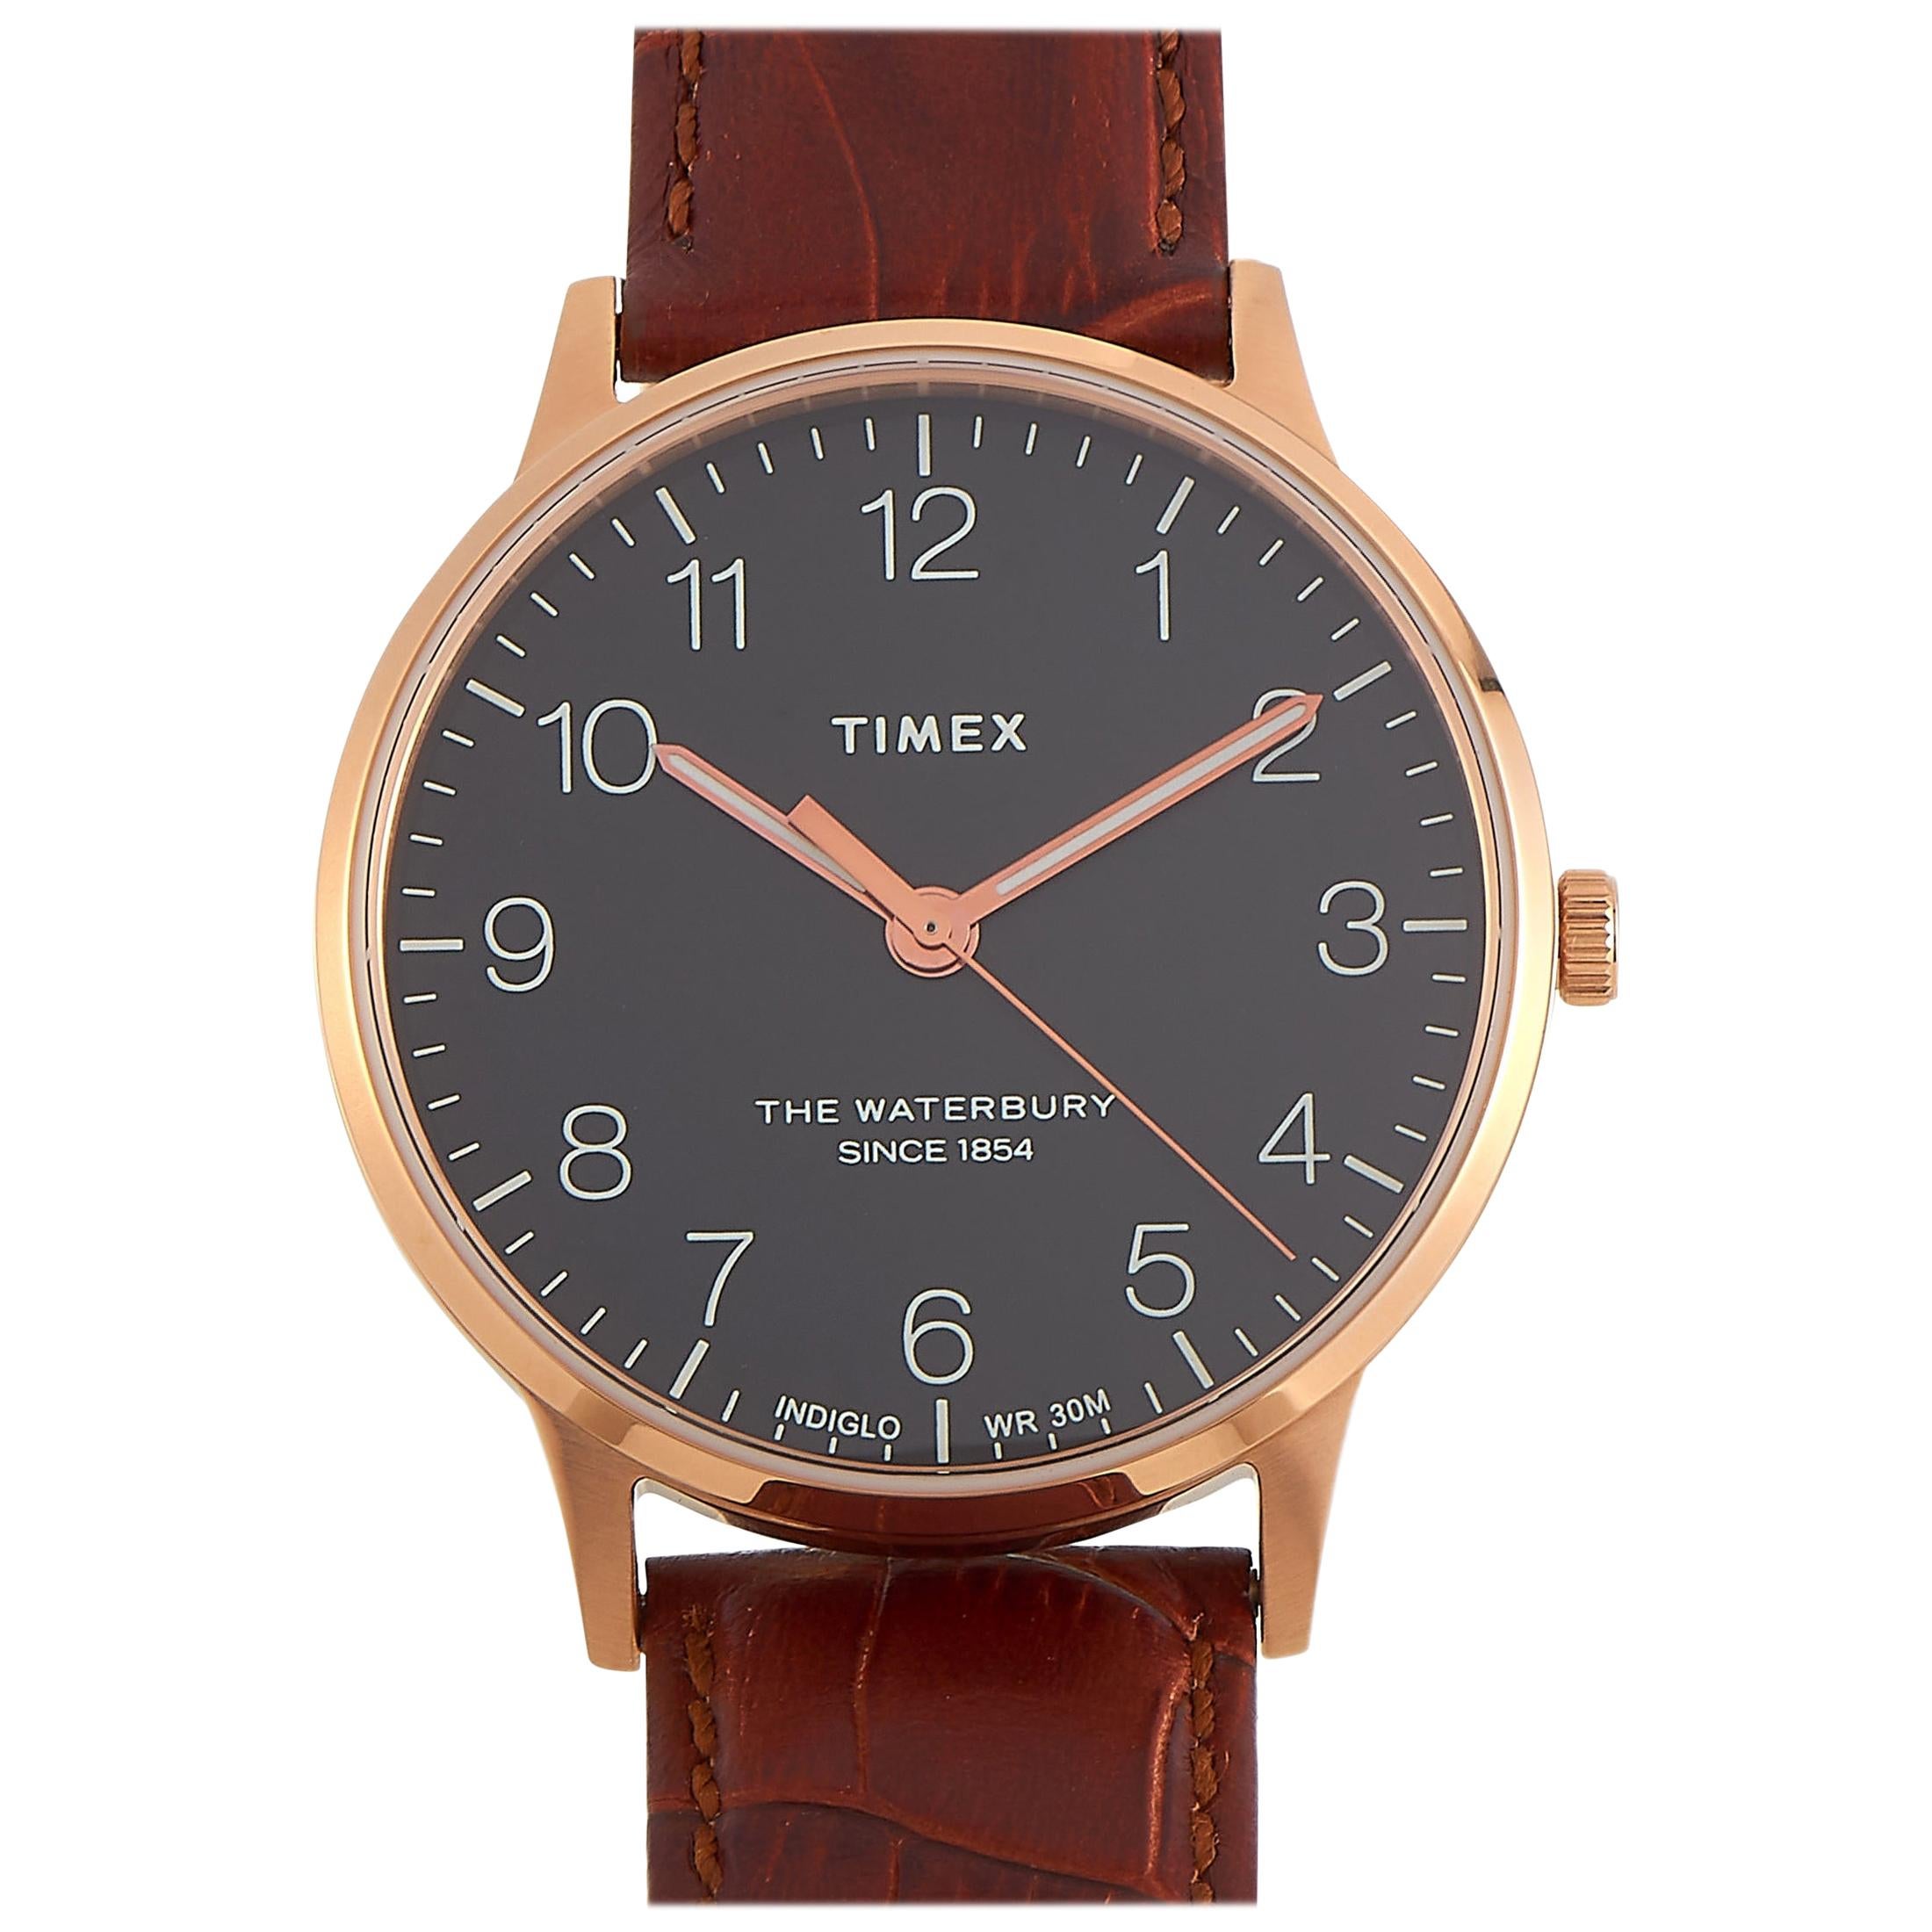 Timex Waterbury Classic Stainless Steel Watch TW2R71400 For Sale